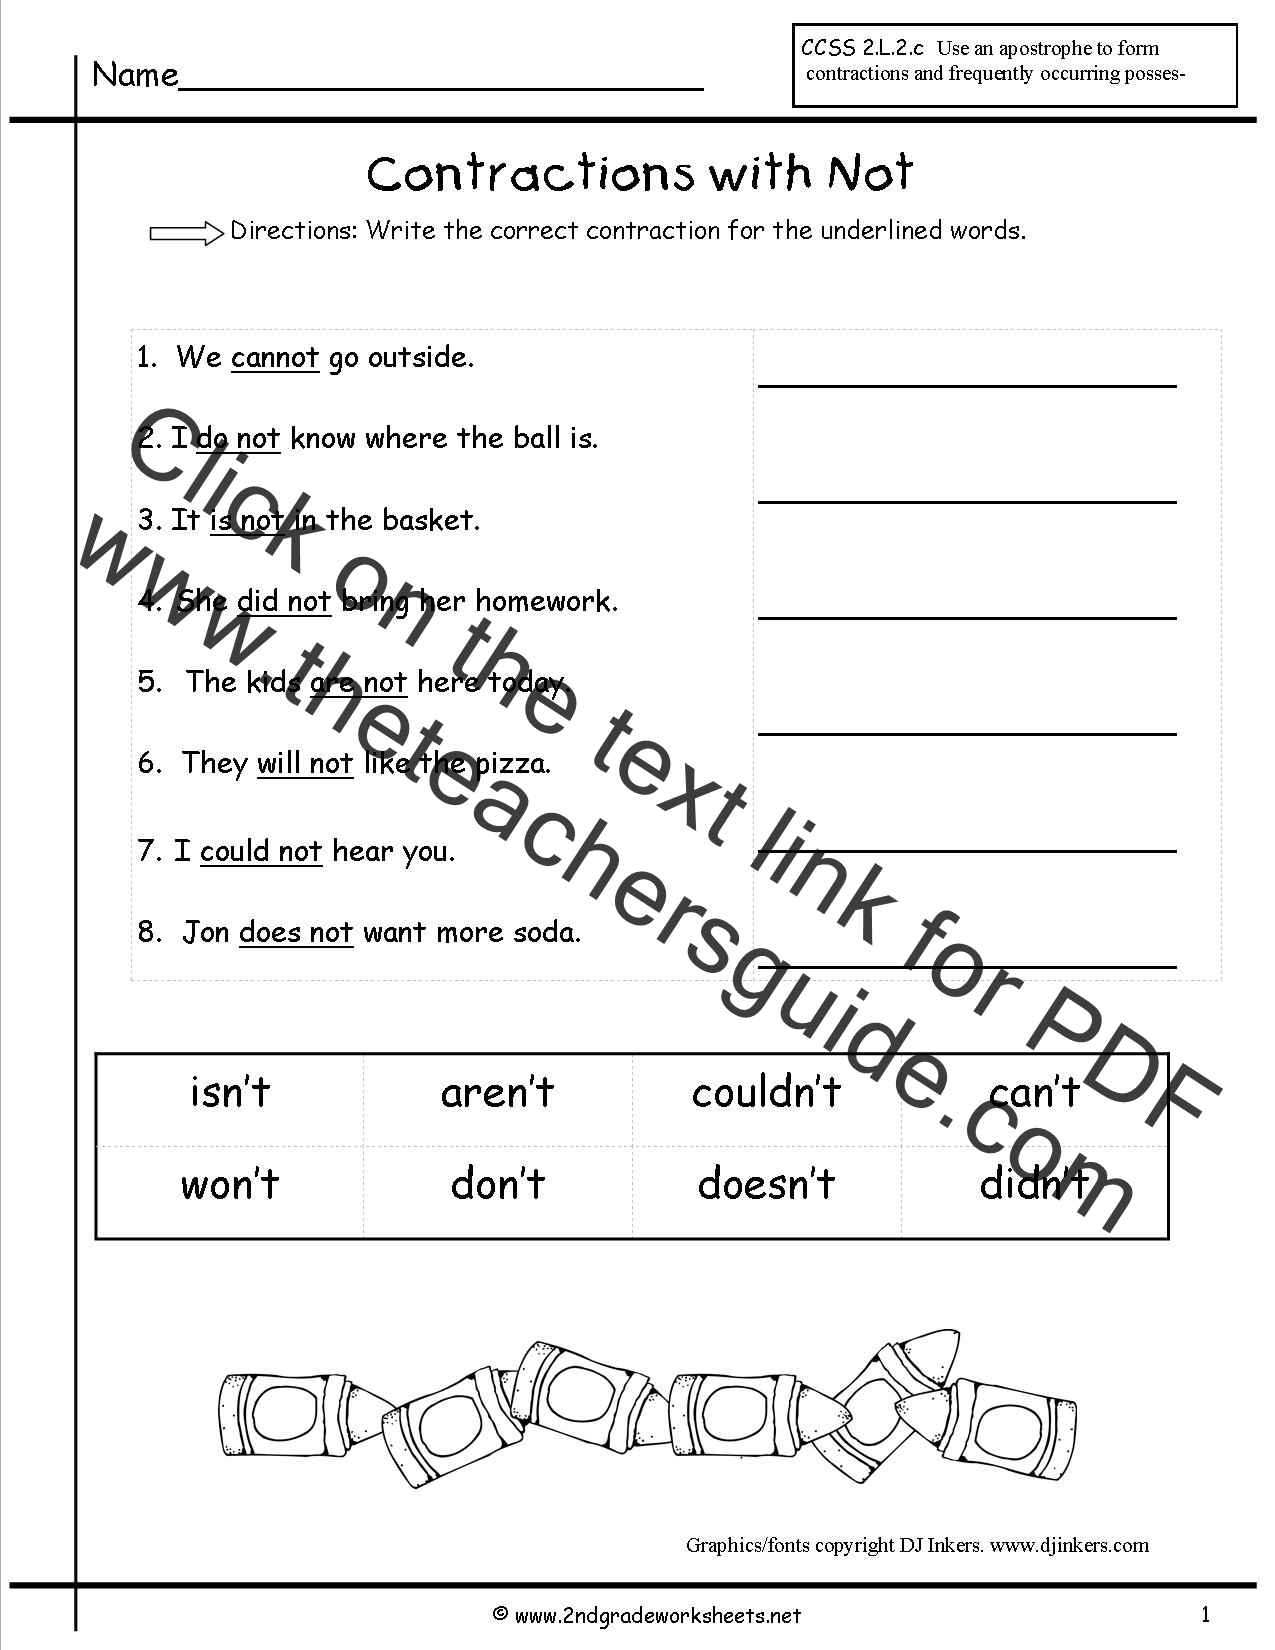 Free Contractions Worksheets and Printouts Regarding Contractions Worksheet 3rd Grade